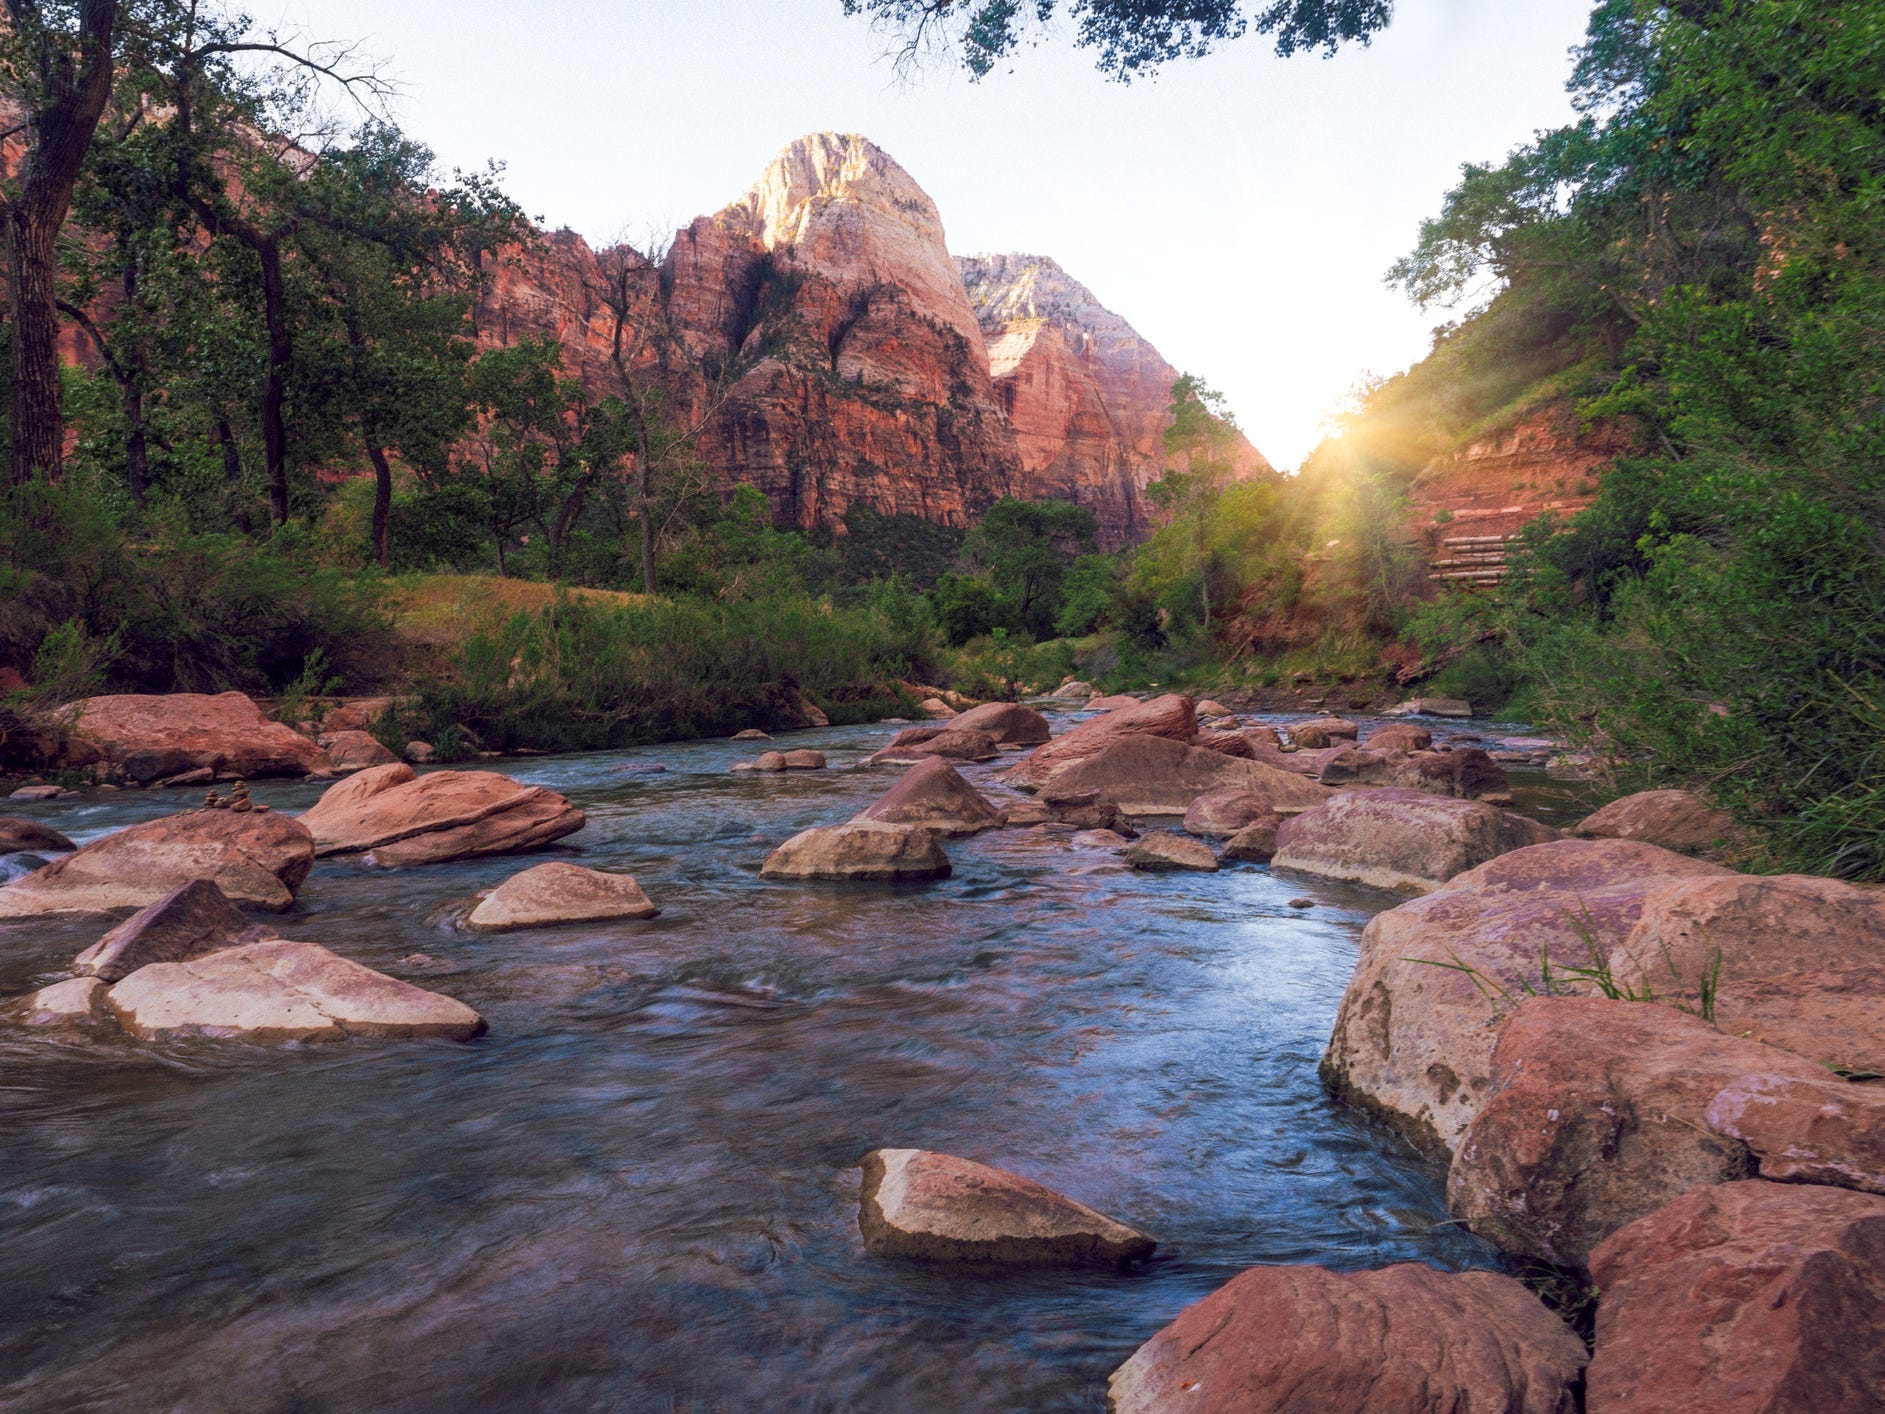 <p>I've visited Zion National Park a few times, so it's no surprise it's one of my favorites. The rock landscapes are breathtaking, and the photos don't do the park justice.</p><p>Whether you're embarking on one of the more popular hikes like <a href="https://www.businessinsider.com/zion-hike-what-it-was-like-climbing-angels-landing-2022-8">Angel's Landing</a> or seeking out a lesser-known spot like the Watchman Trail, there's much to see and do.</p><p>As a bonus, Zion is about a two-hour drive from Bryce Canyon, making it easy to visit both parks in one trip.</p>